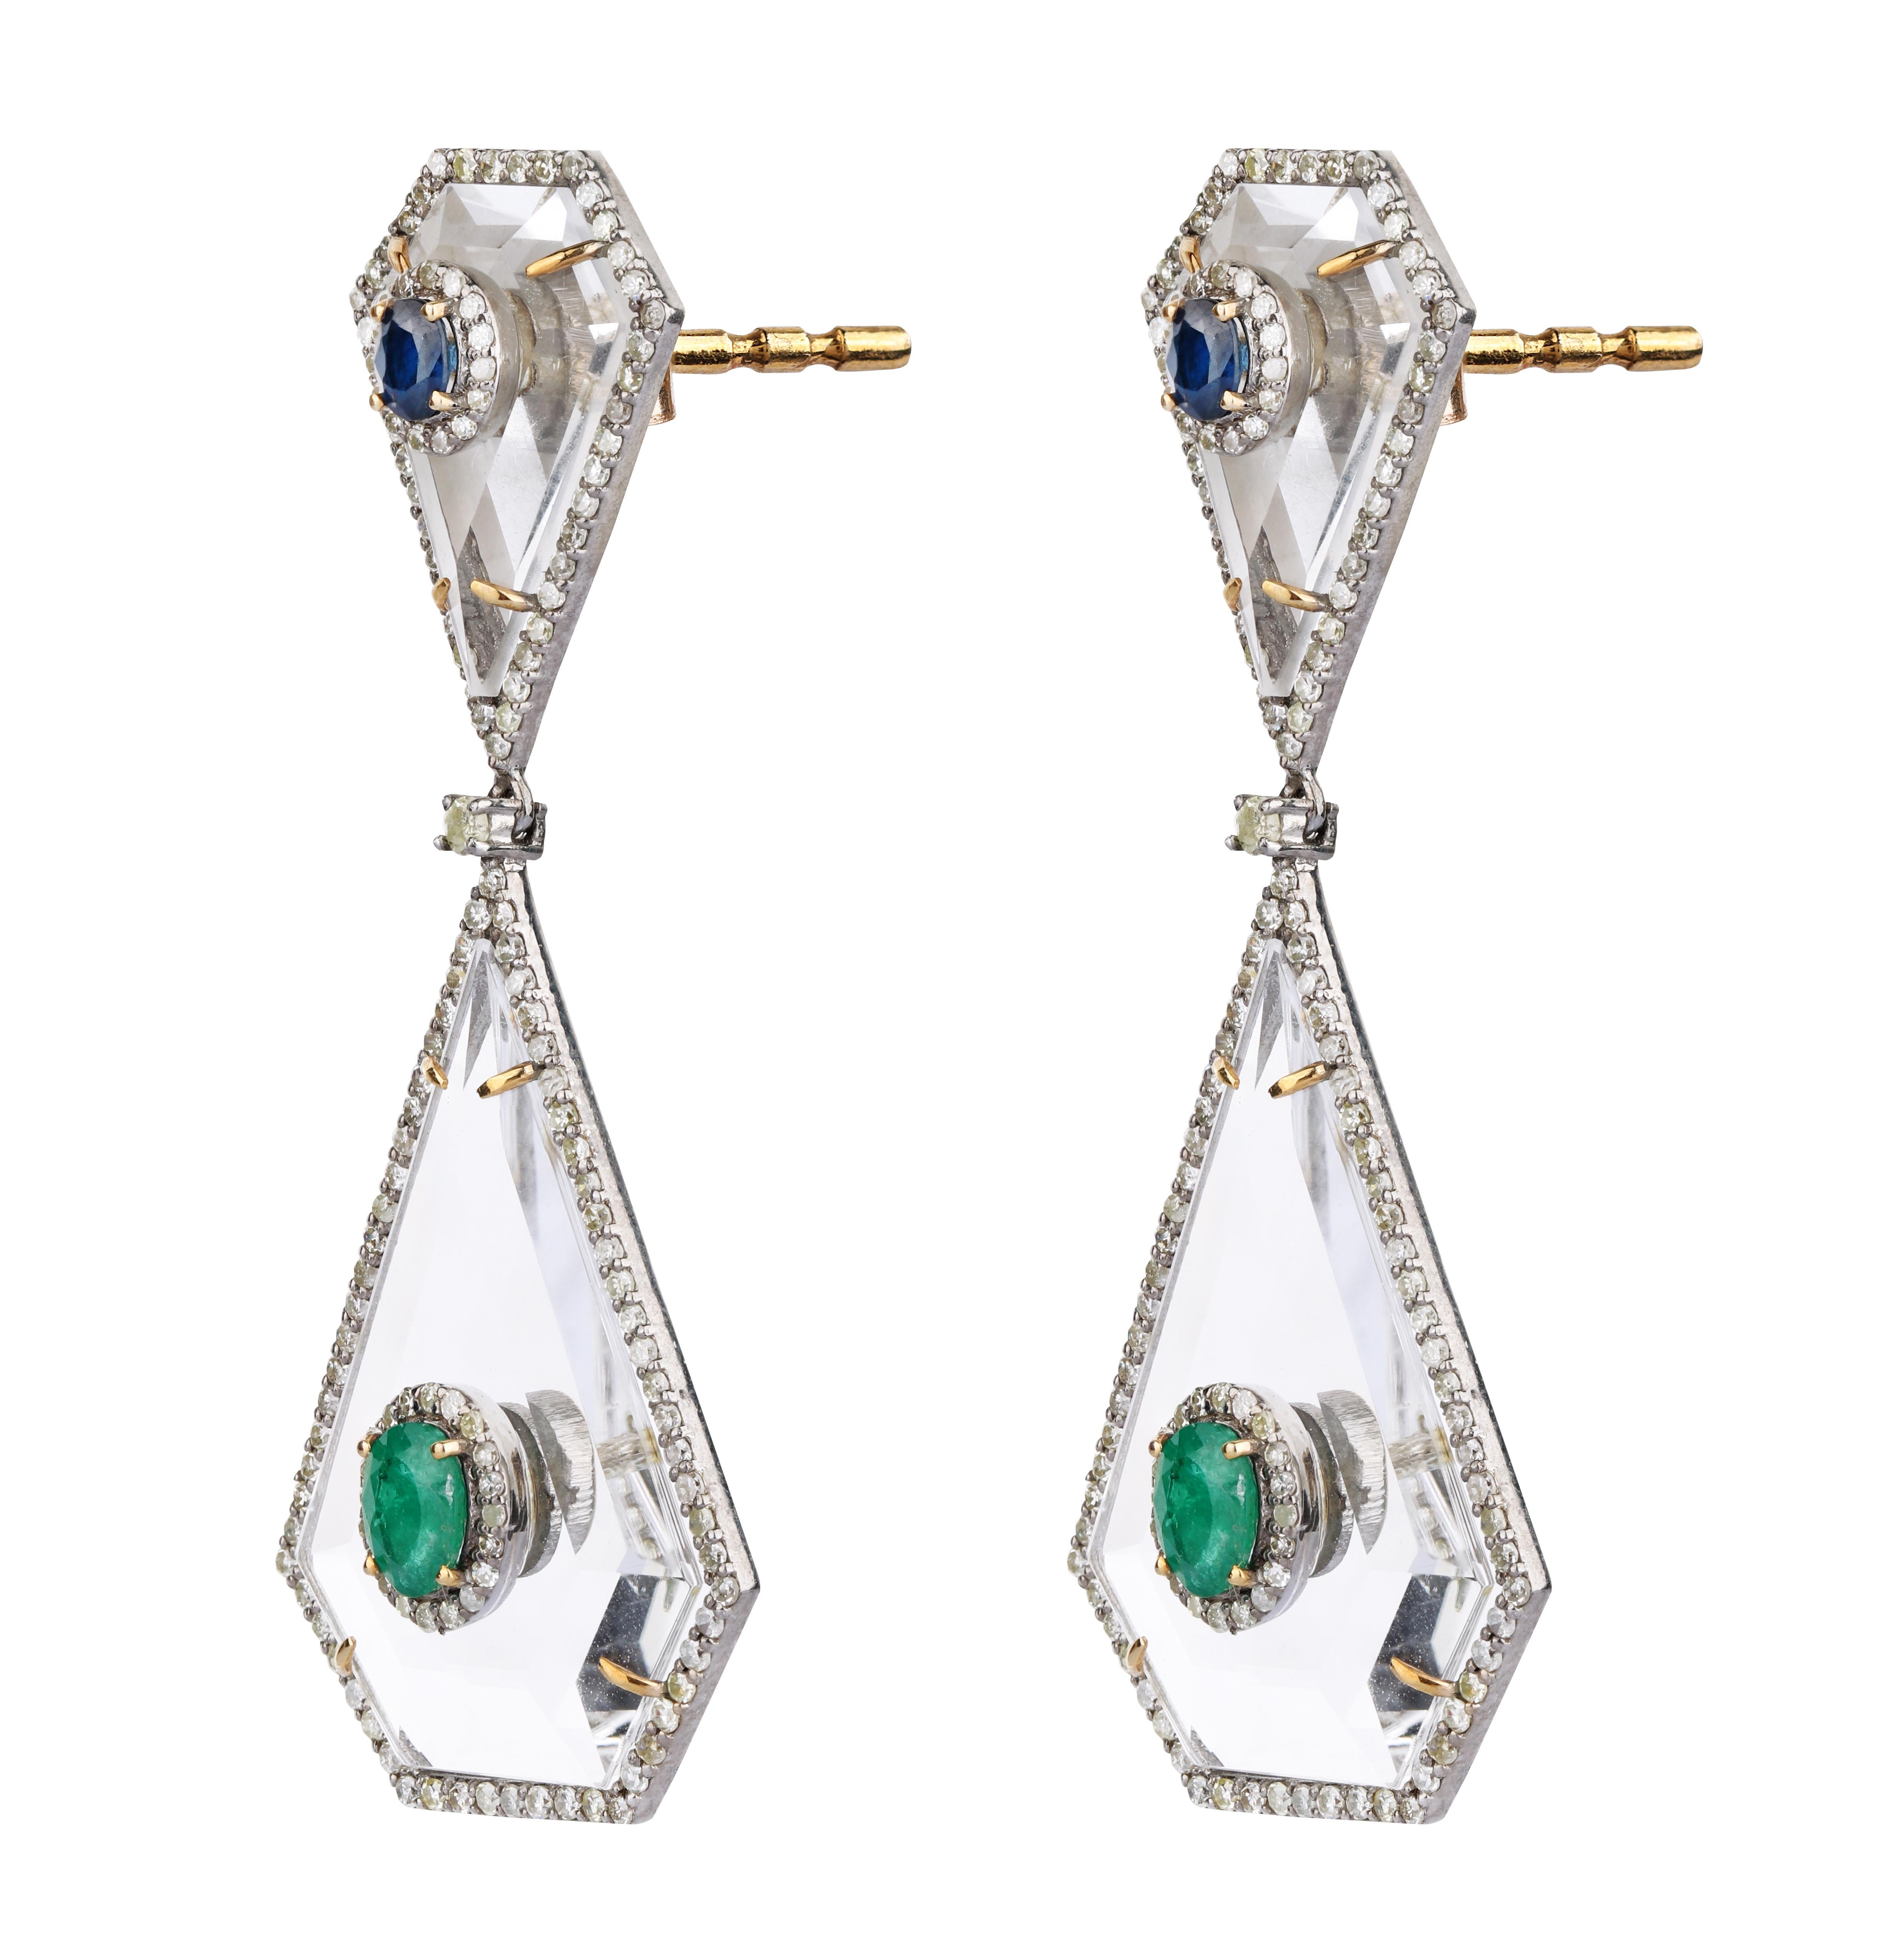 29.20 carats Crystal, Diamond, Emerald, and Sapphire Dangle Earrings

We are here to make you return to the lingering memories that echo in the vast suitcase of happiness. The time when you wore an exquisite pair of earrings and witnessed them